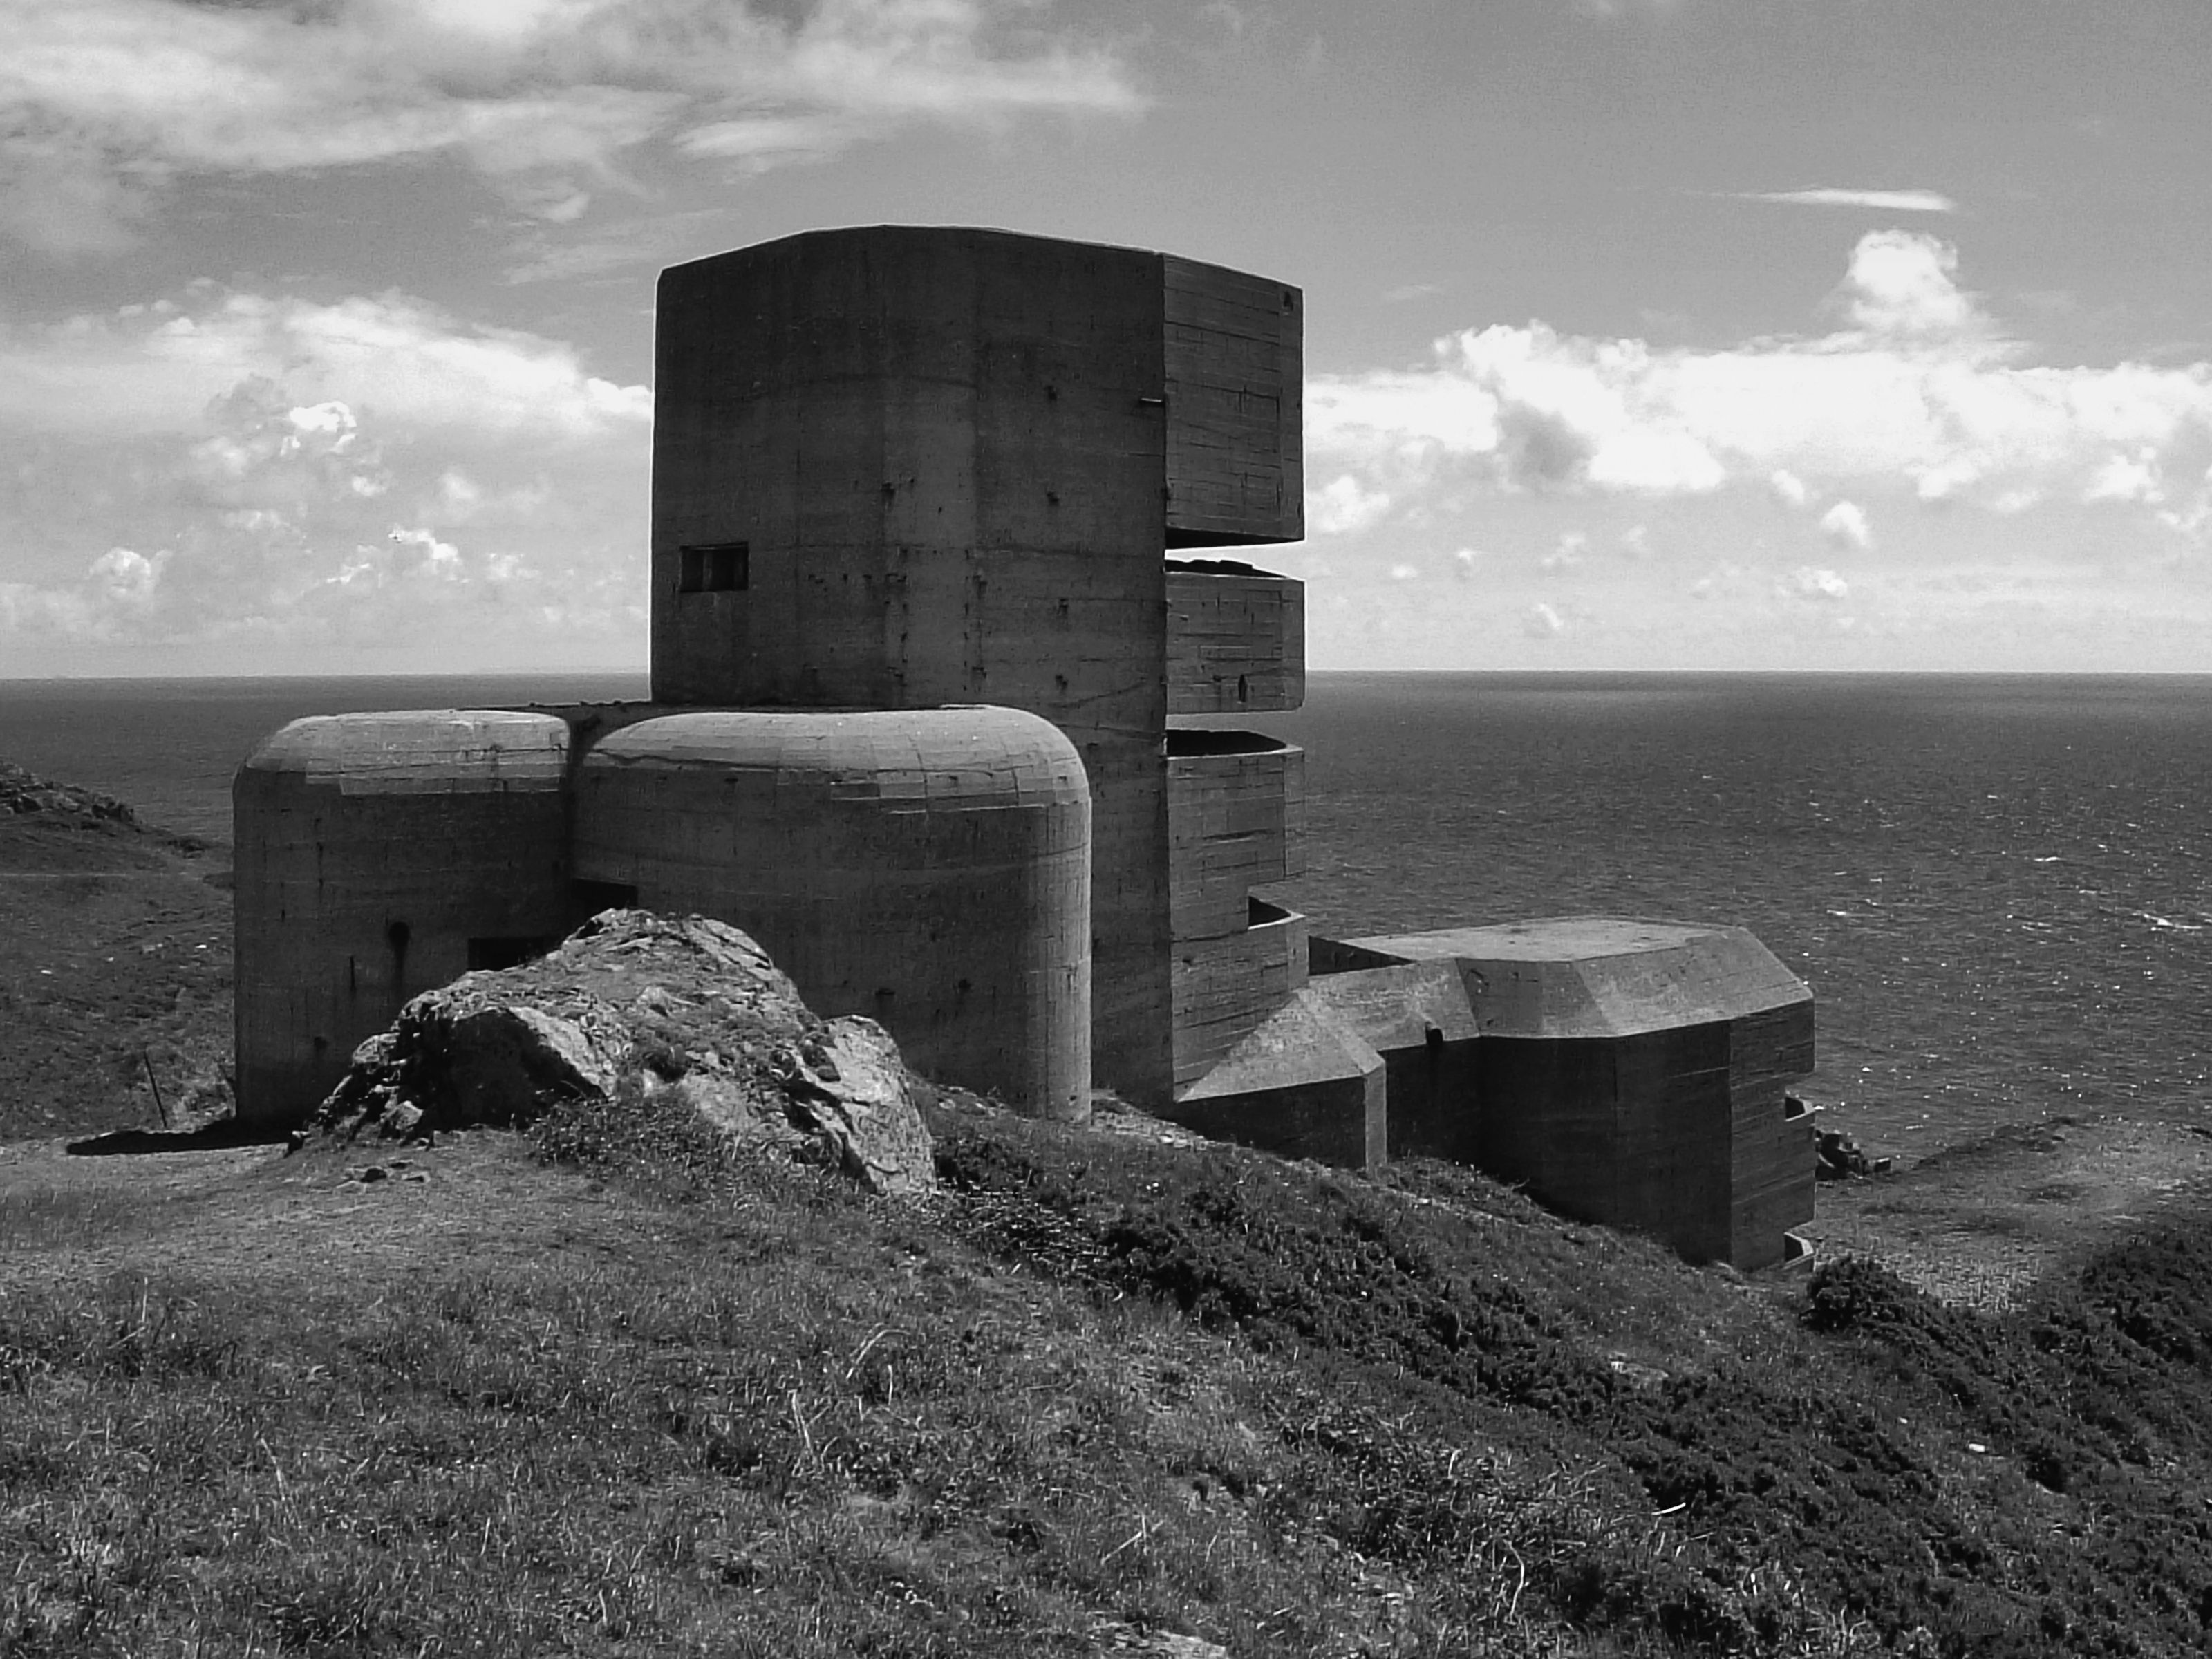 MP4 L’Angle Tower, Todt Organization, Alderney, Bailiwick of Guernsey, Channel Islands, 1942